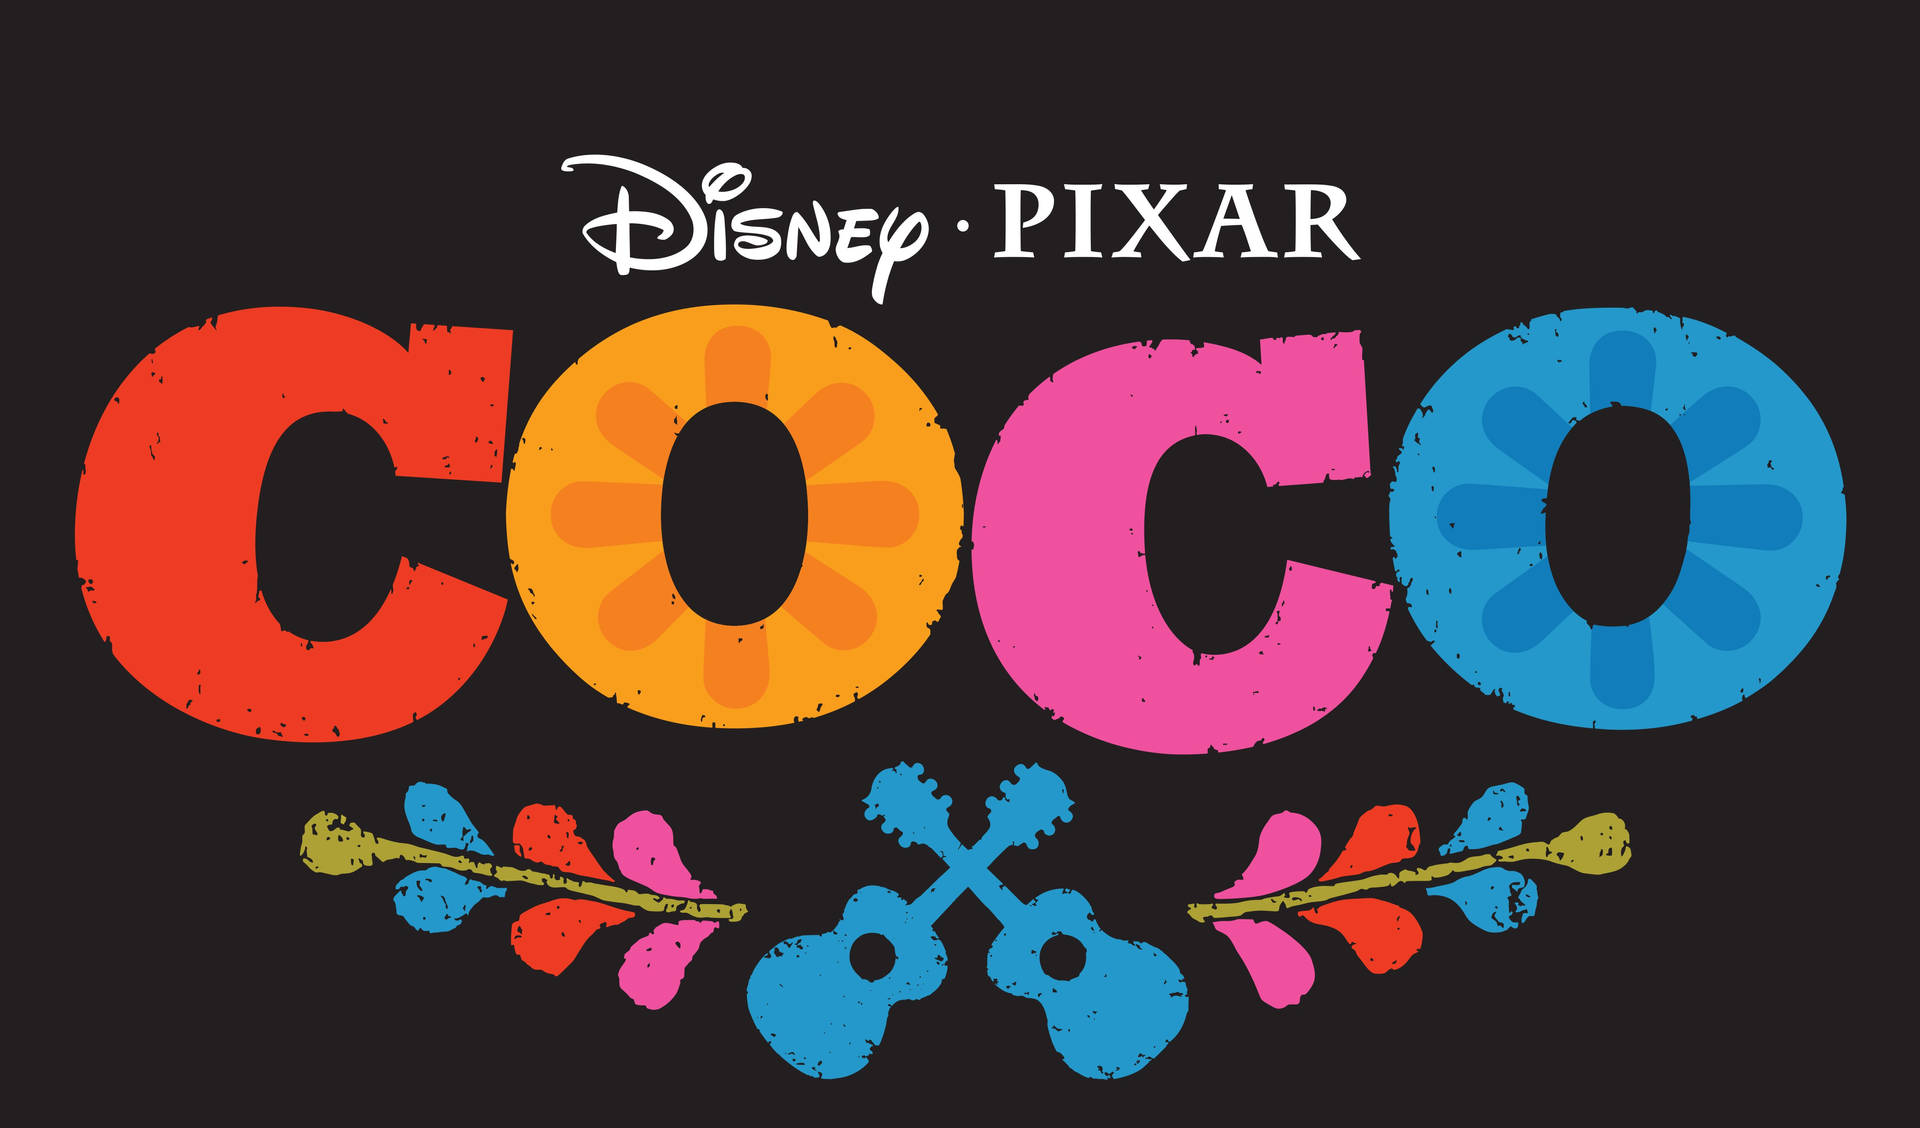 Coco 5087X2988 Wallpaper and Background Image